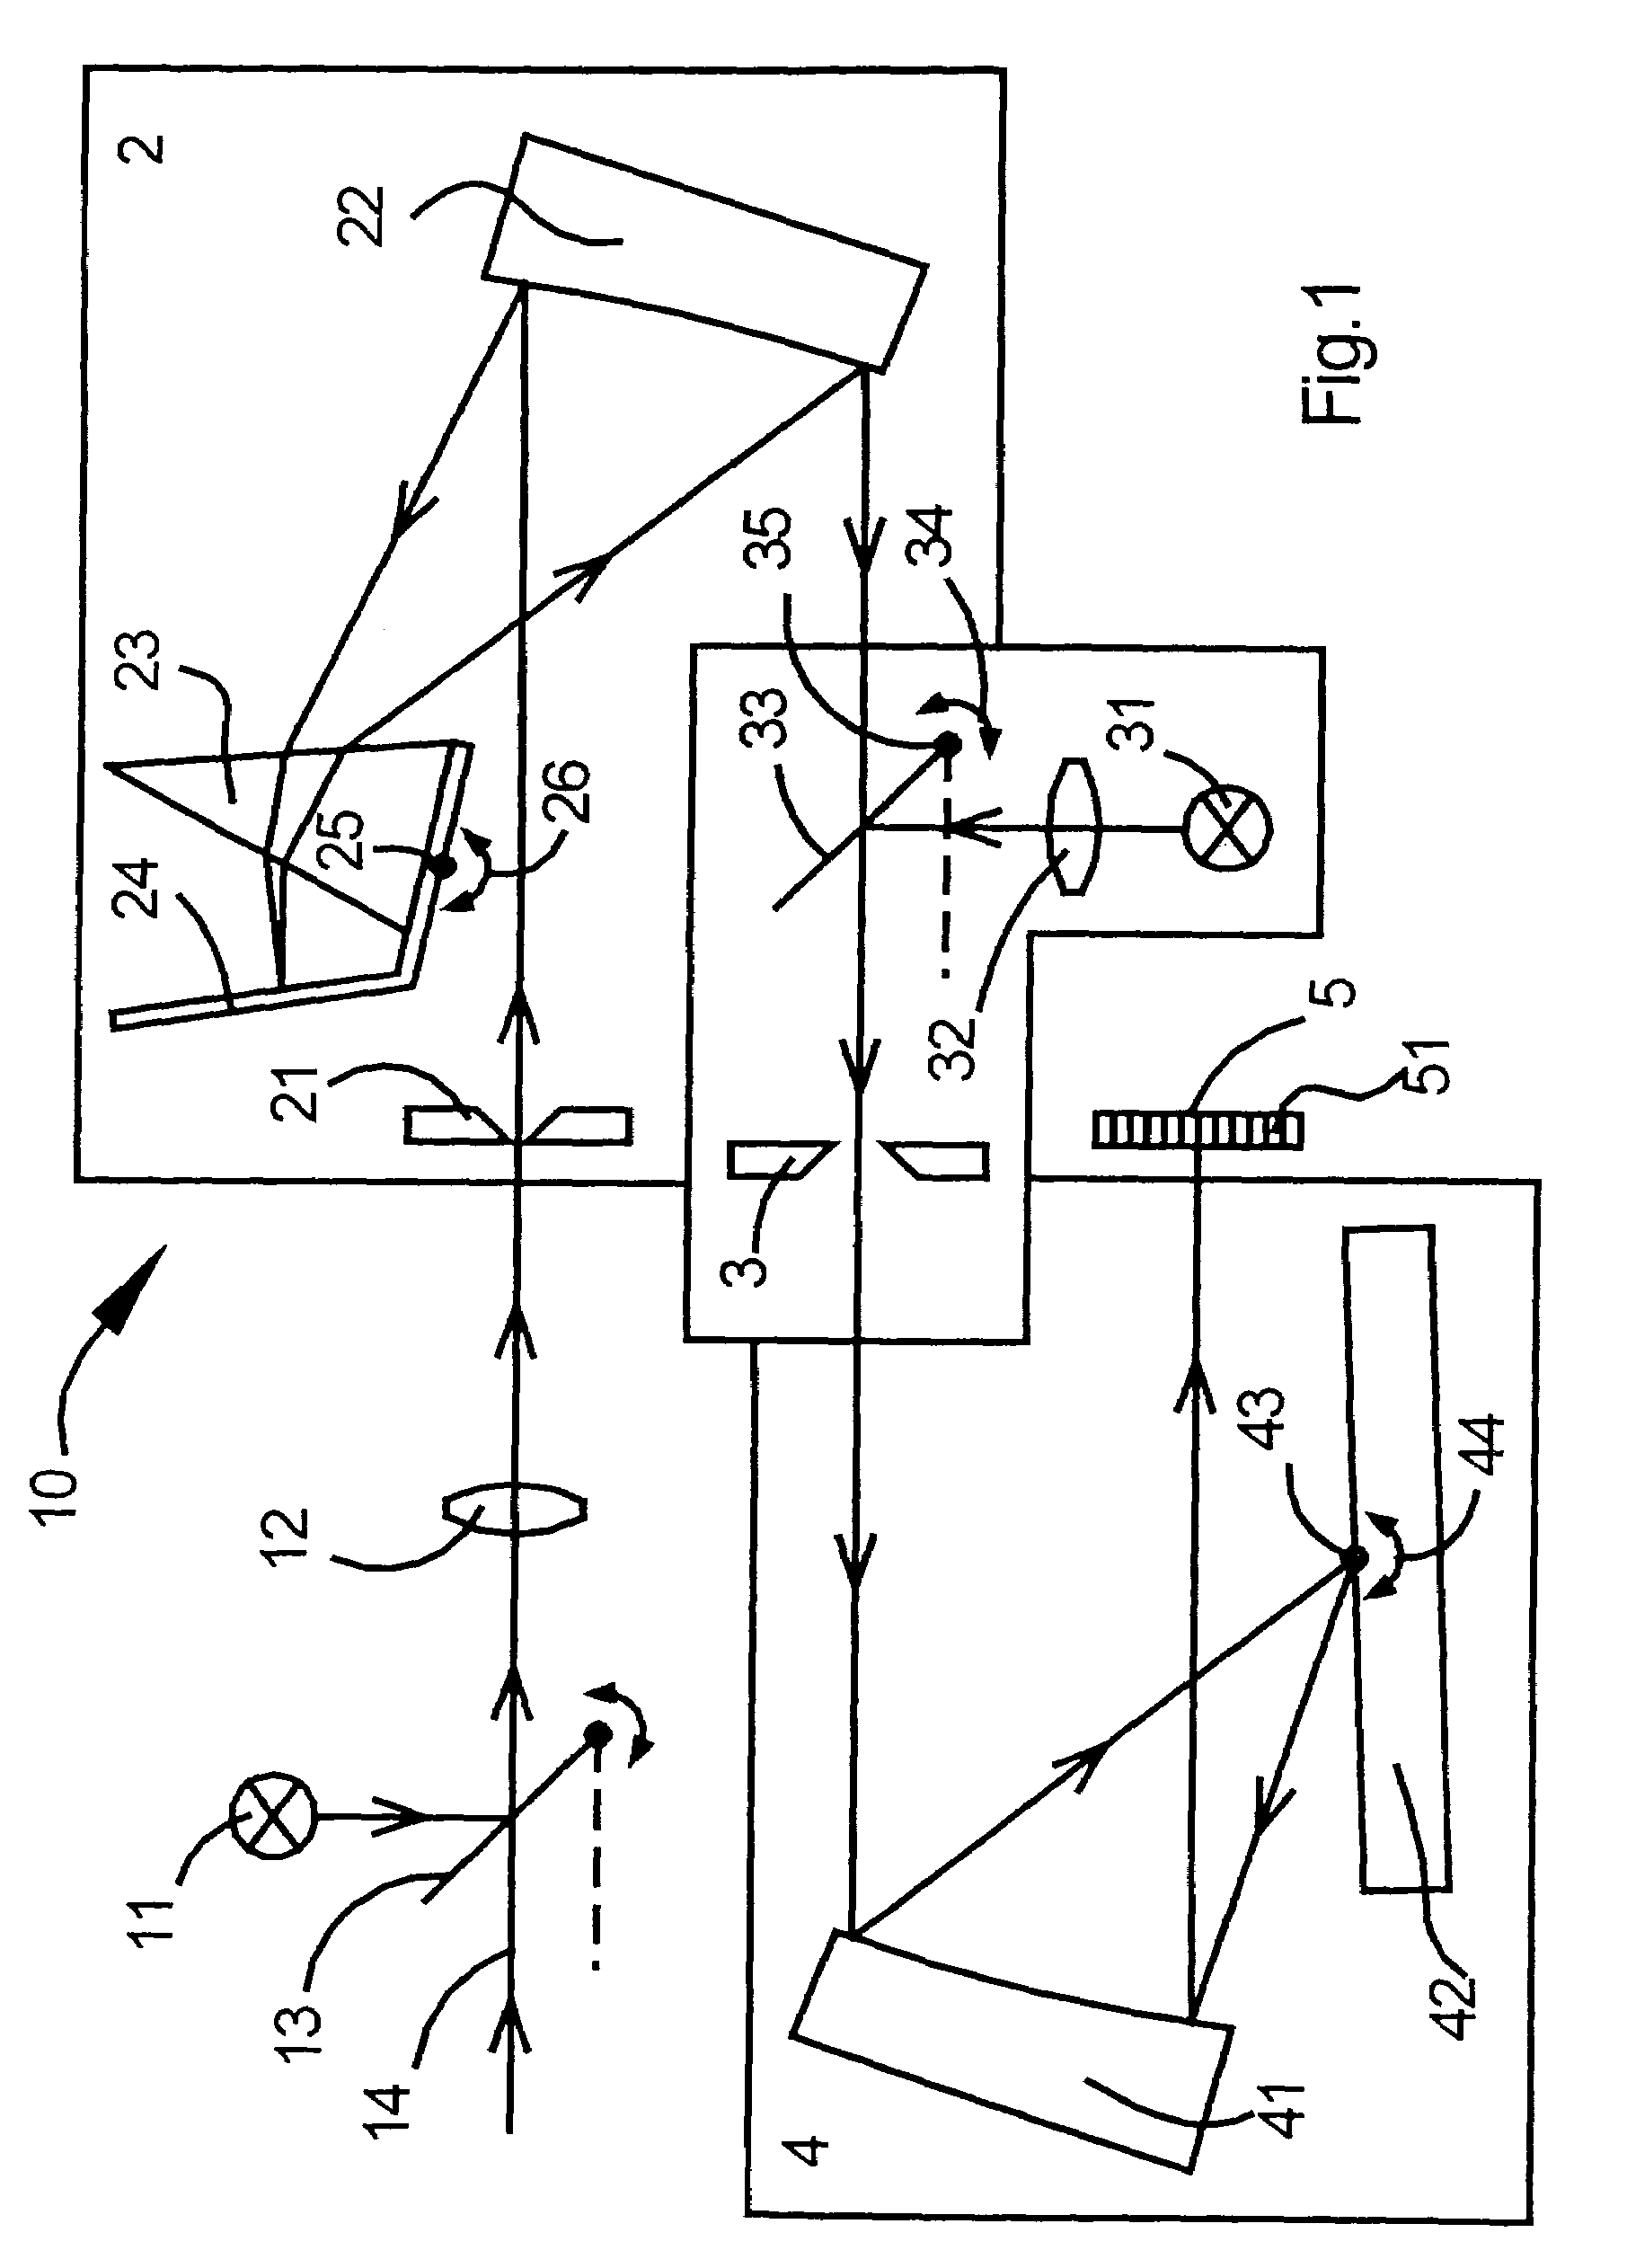 Assembly and method for wavelength calibration in an echelle spectrometer